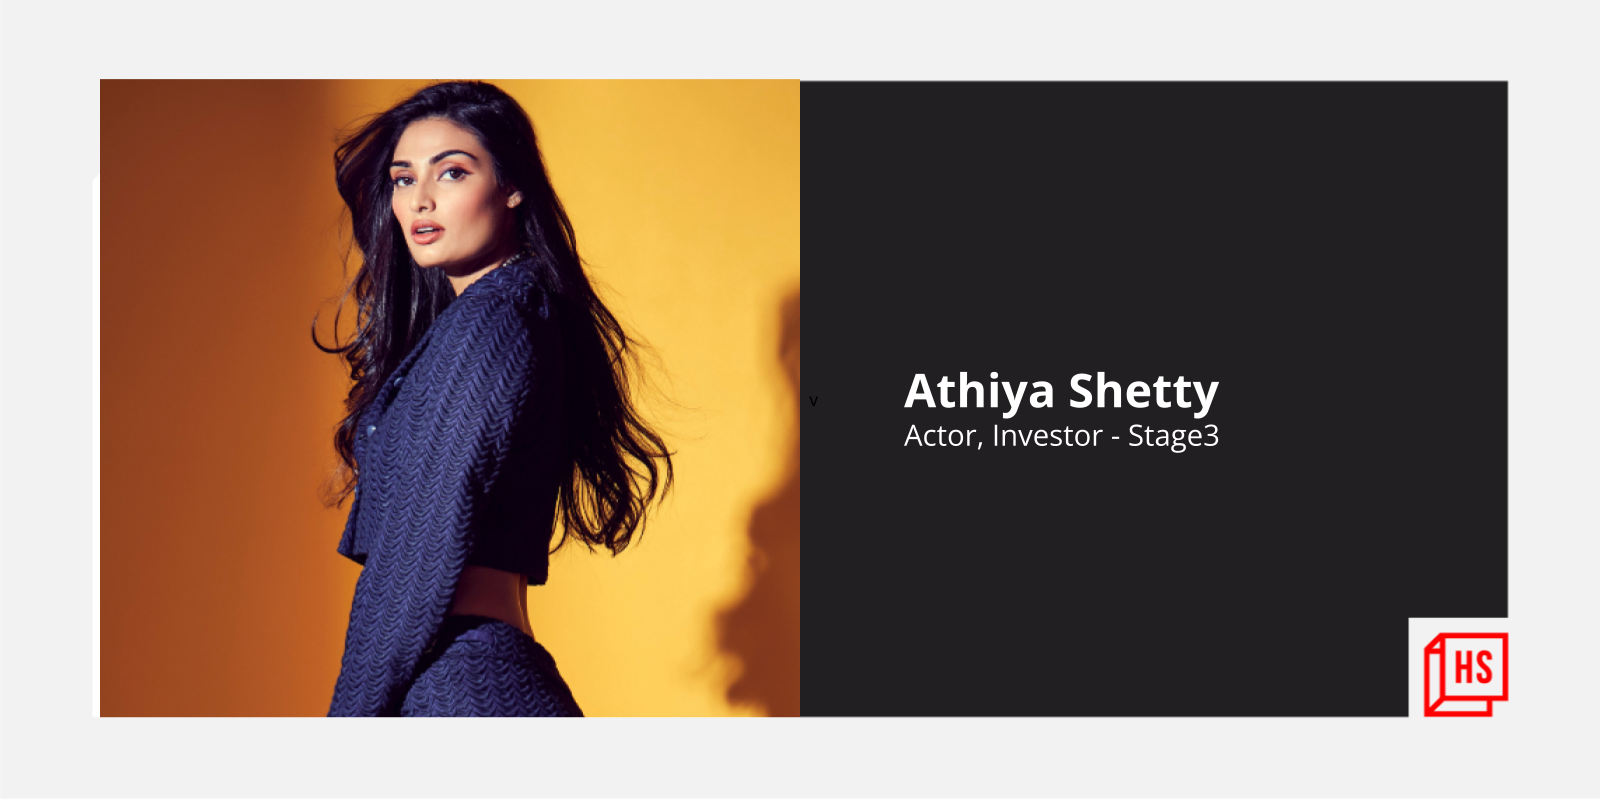 Actor Athiya Shetty turns entrepreneur, invests in India’s leading social commerce platform Stage3

